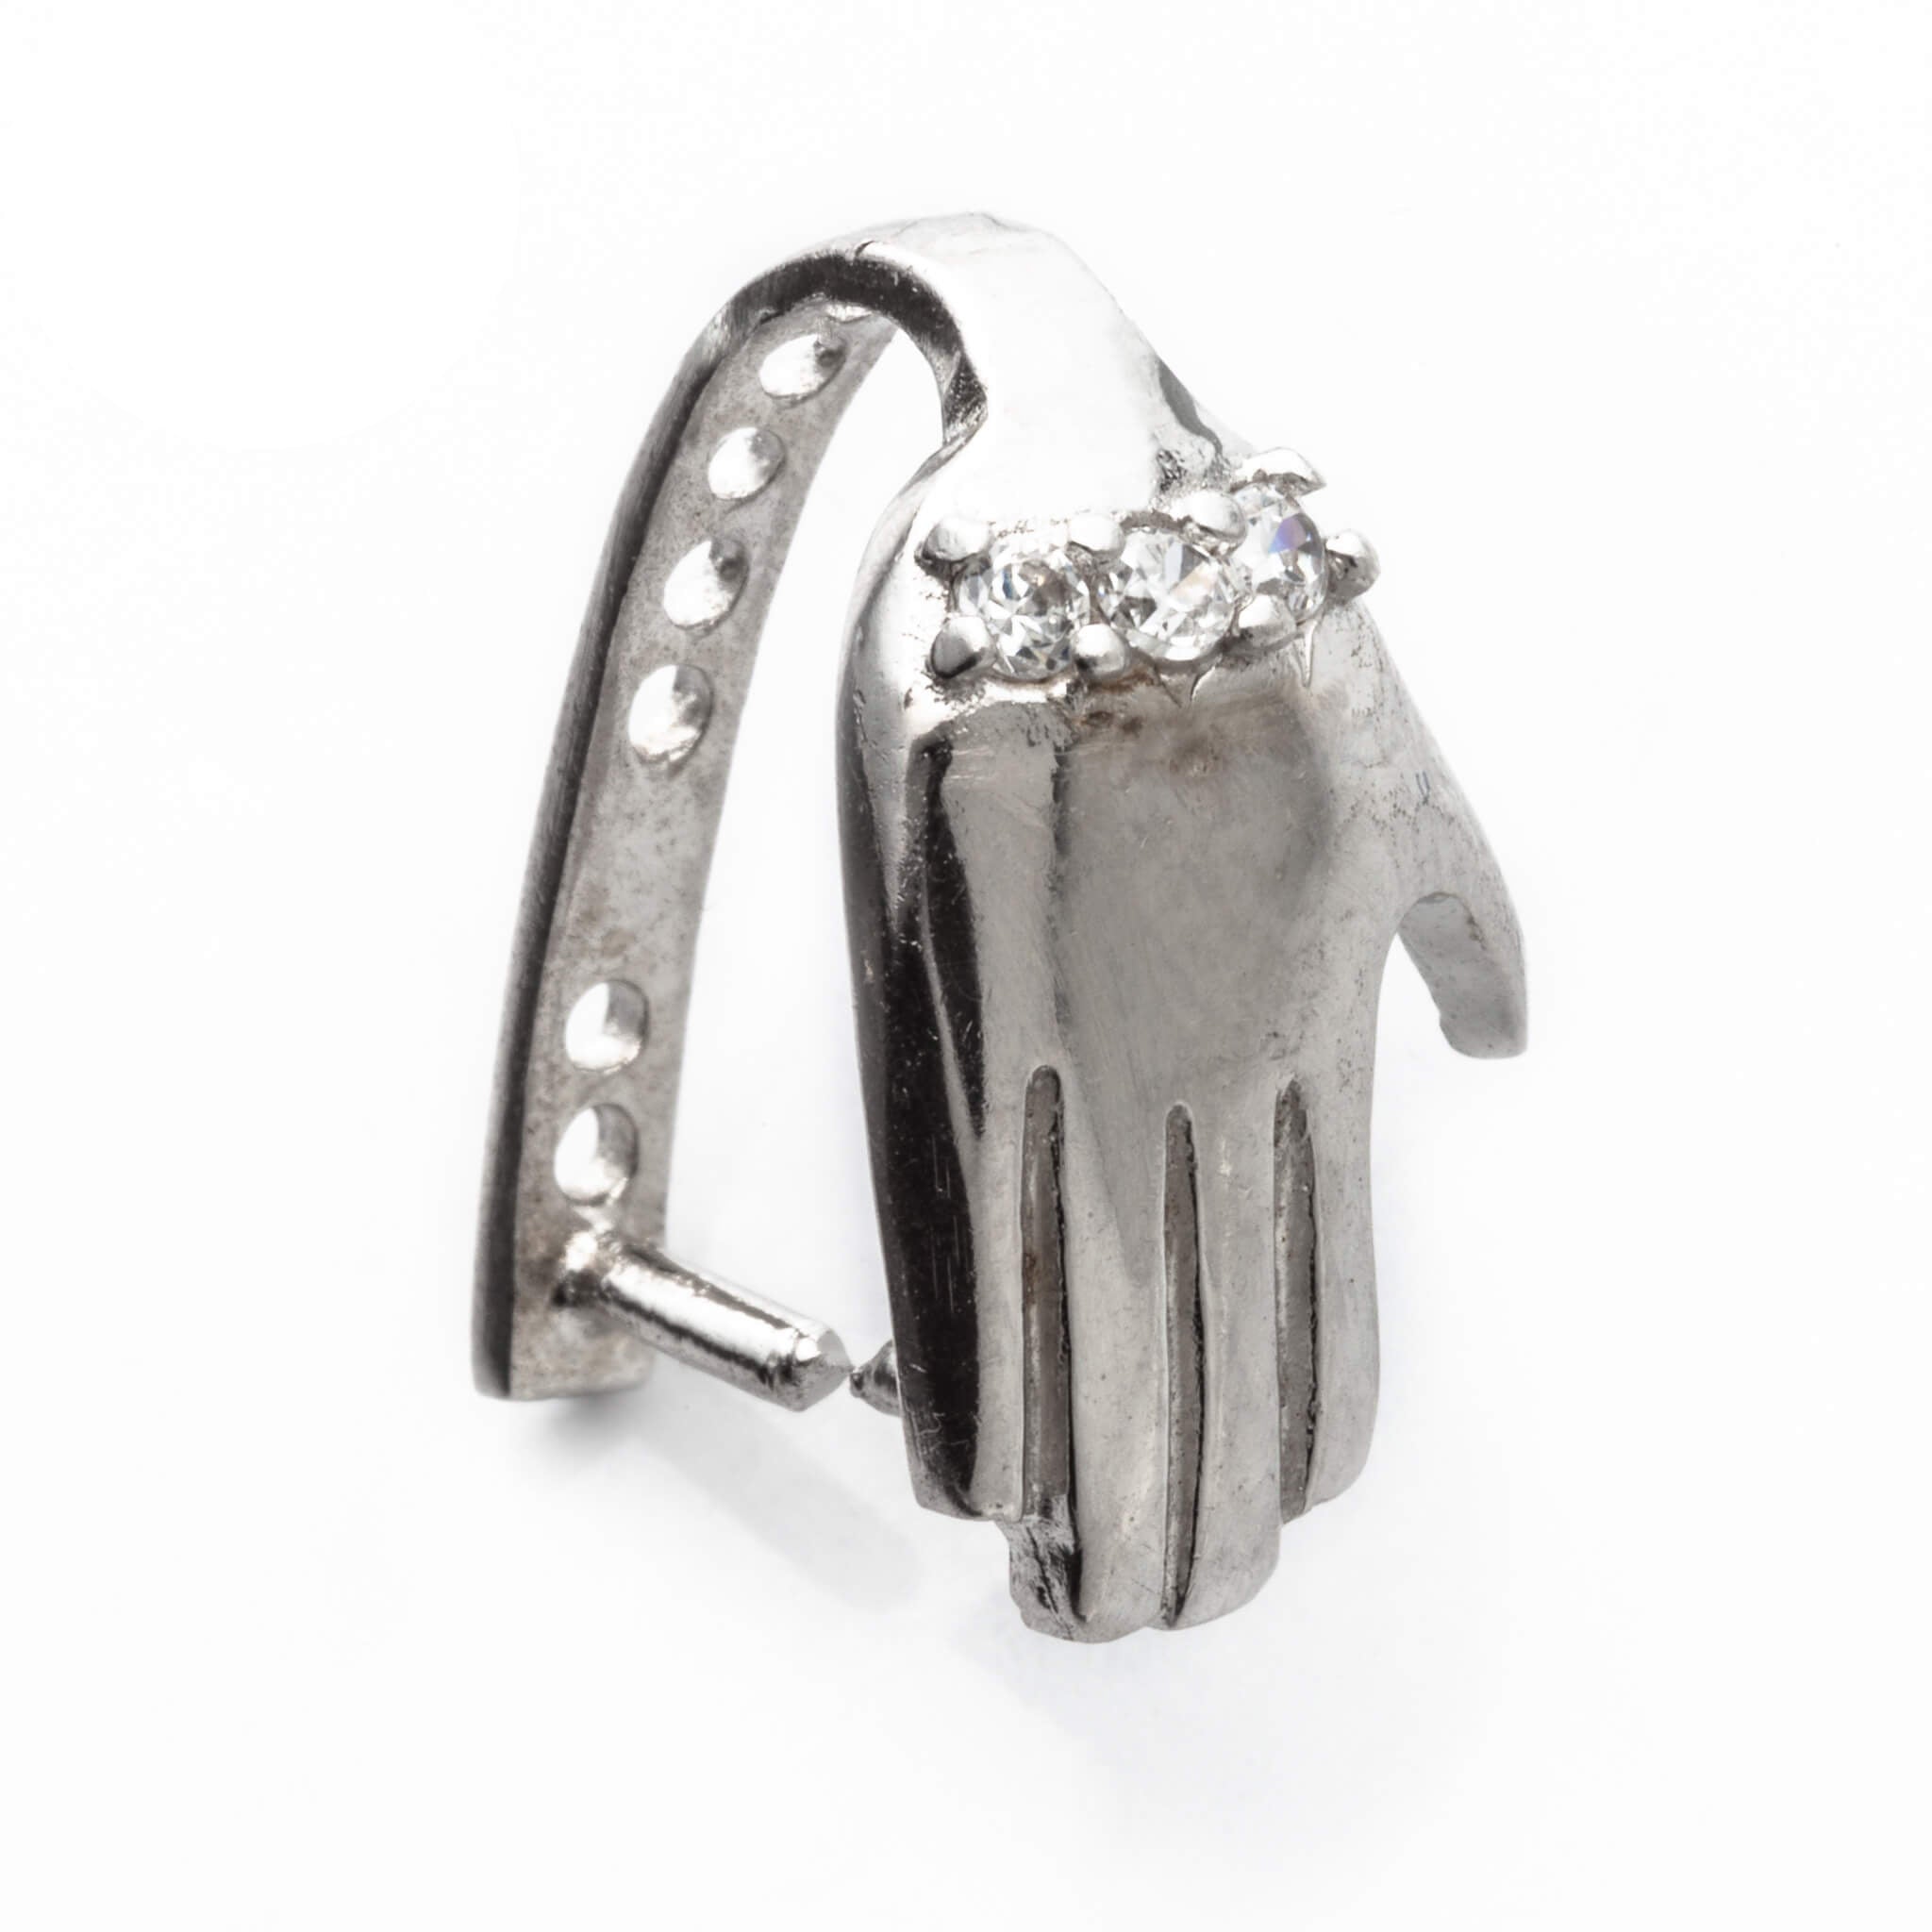 Hand Pinch Bail with Cubic Zirconia Inlays in Sterling Silver 13.9x10.3x9.8mm